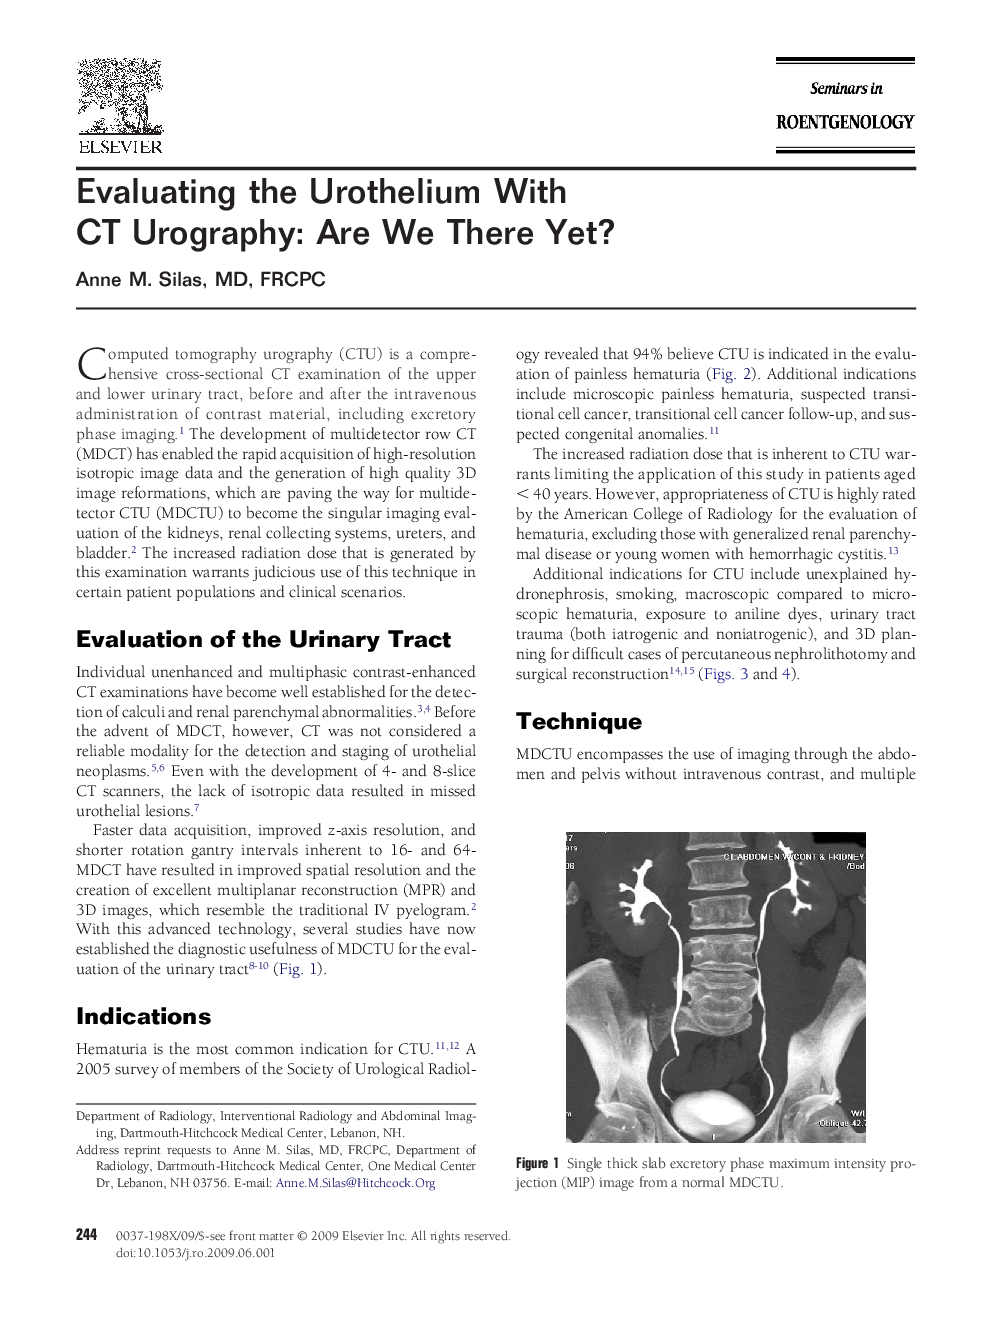 Evaluating the Urothelium With CT Urography: Are We There Yet?